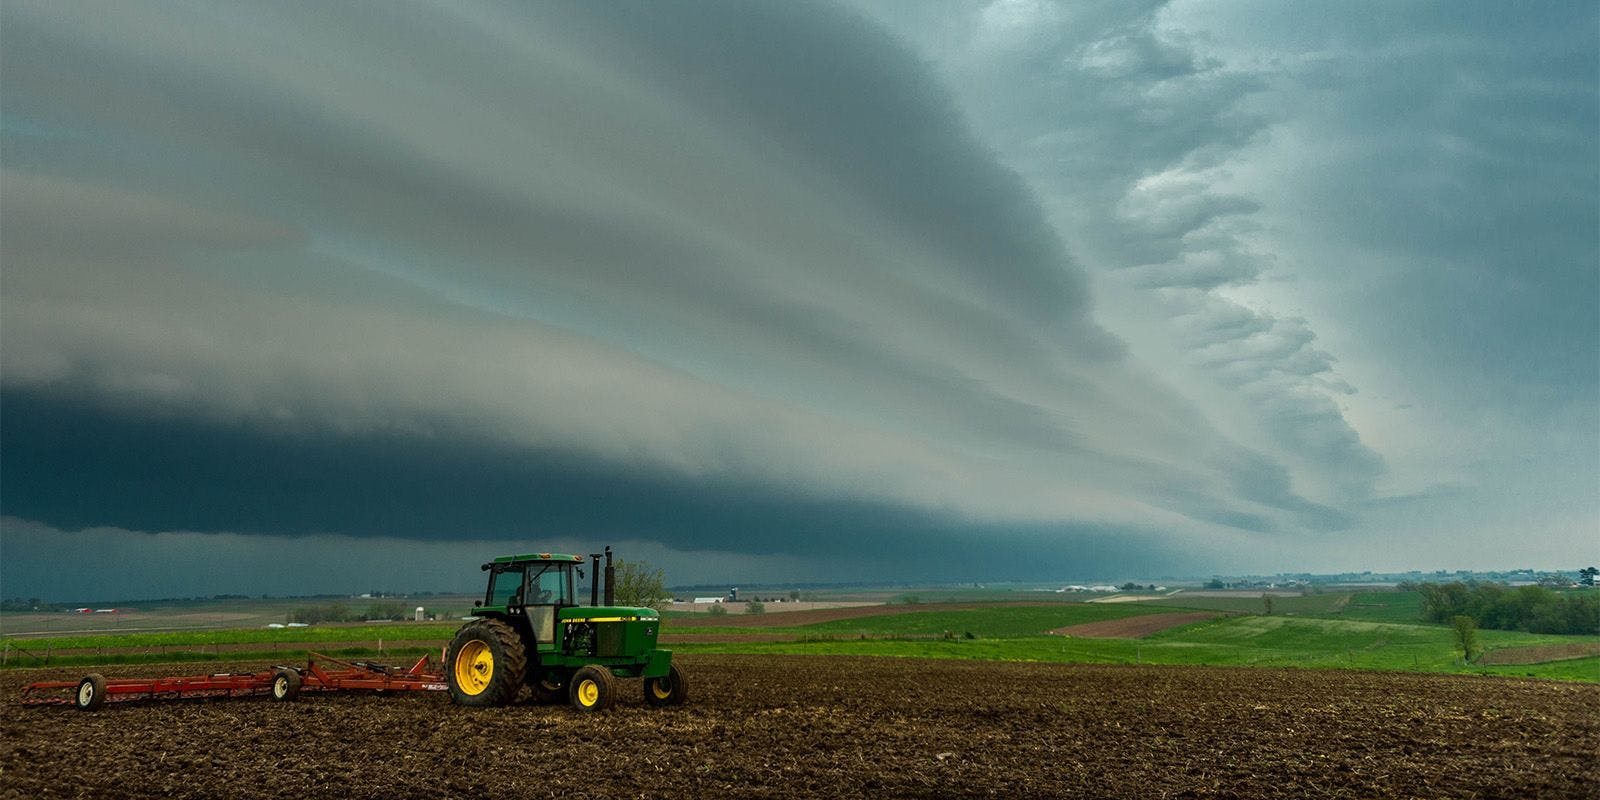 A tractor pulls a disc through a field on a cloudy day at the Tranel farm in Wisconsin.